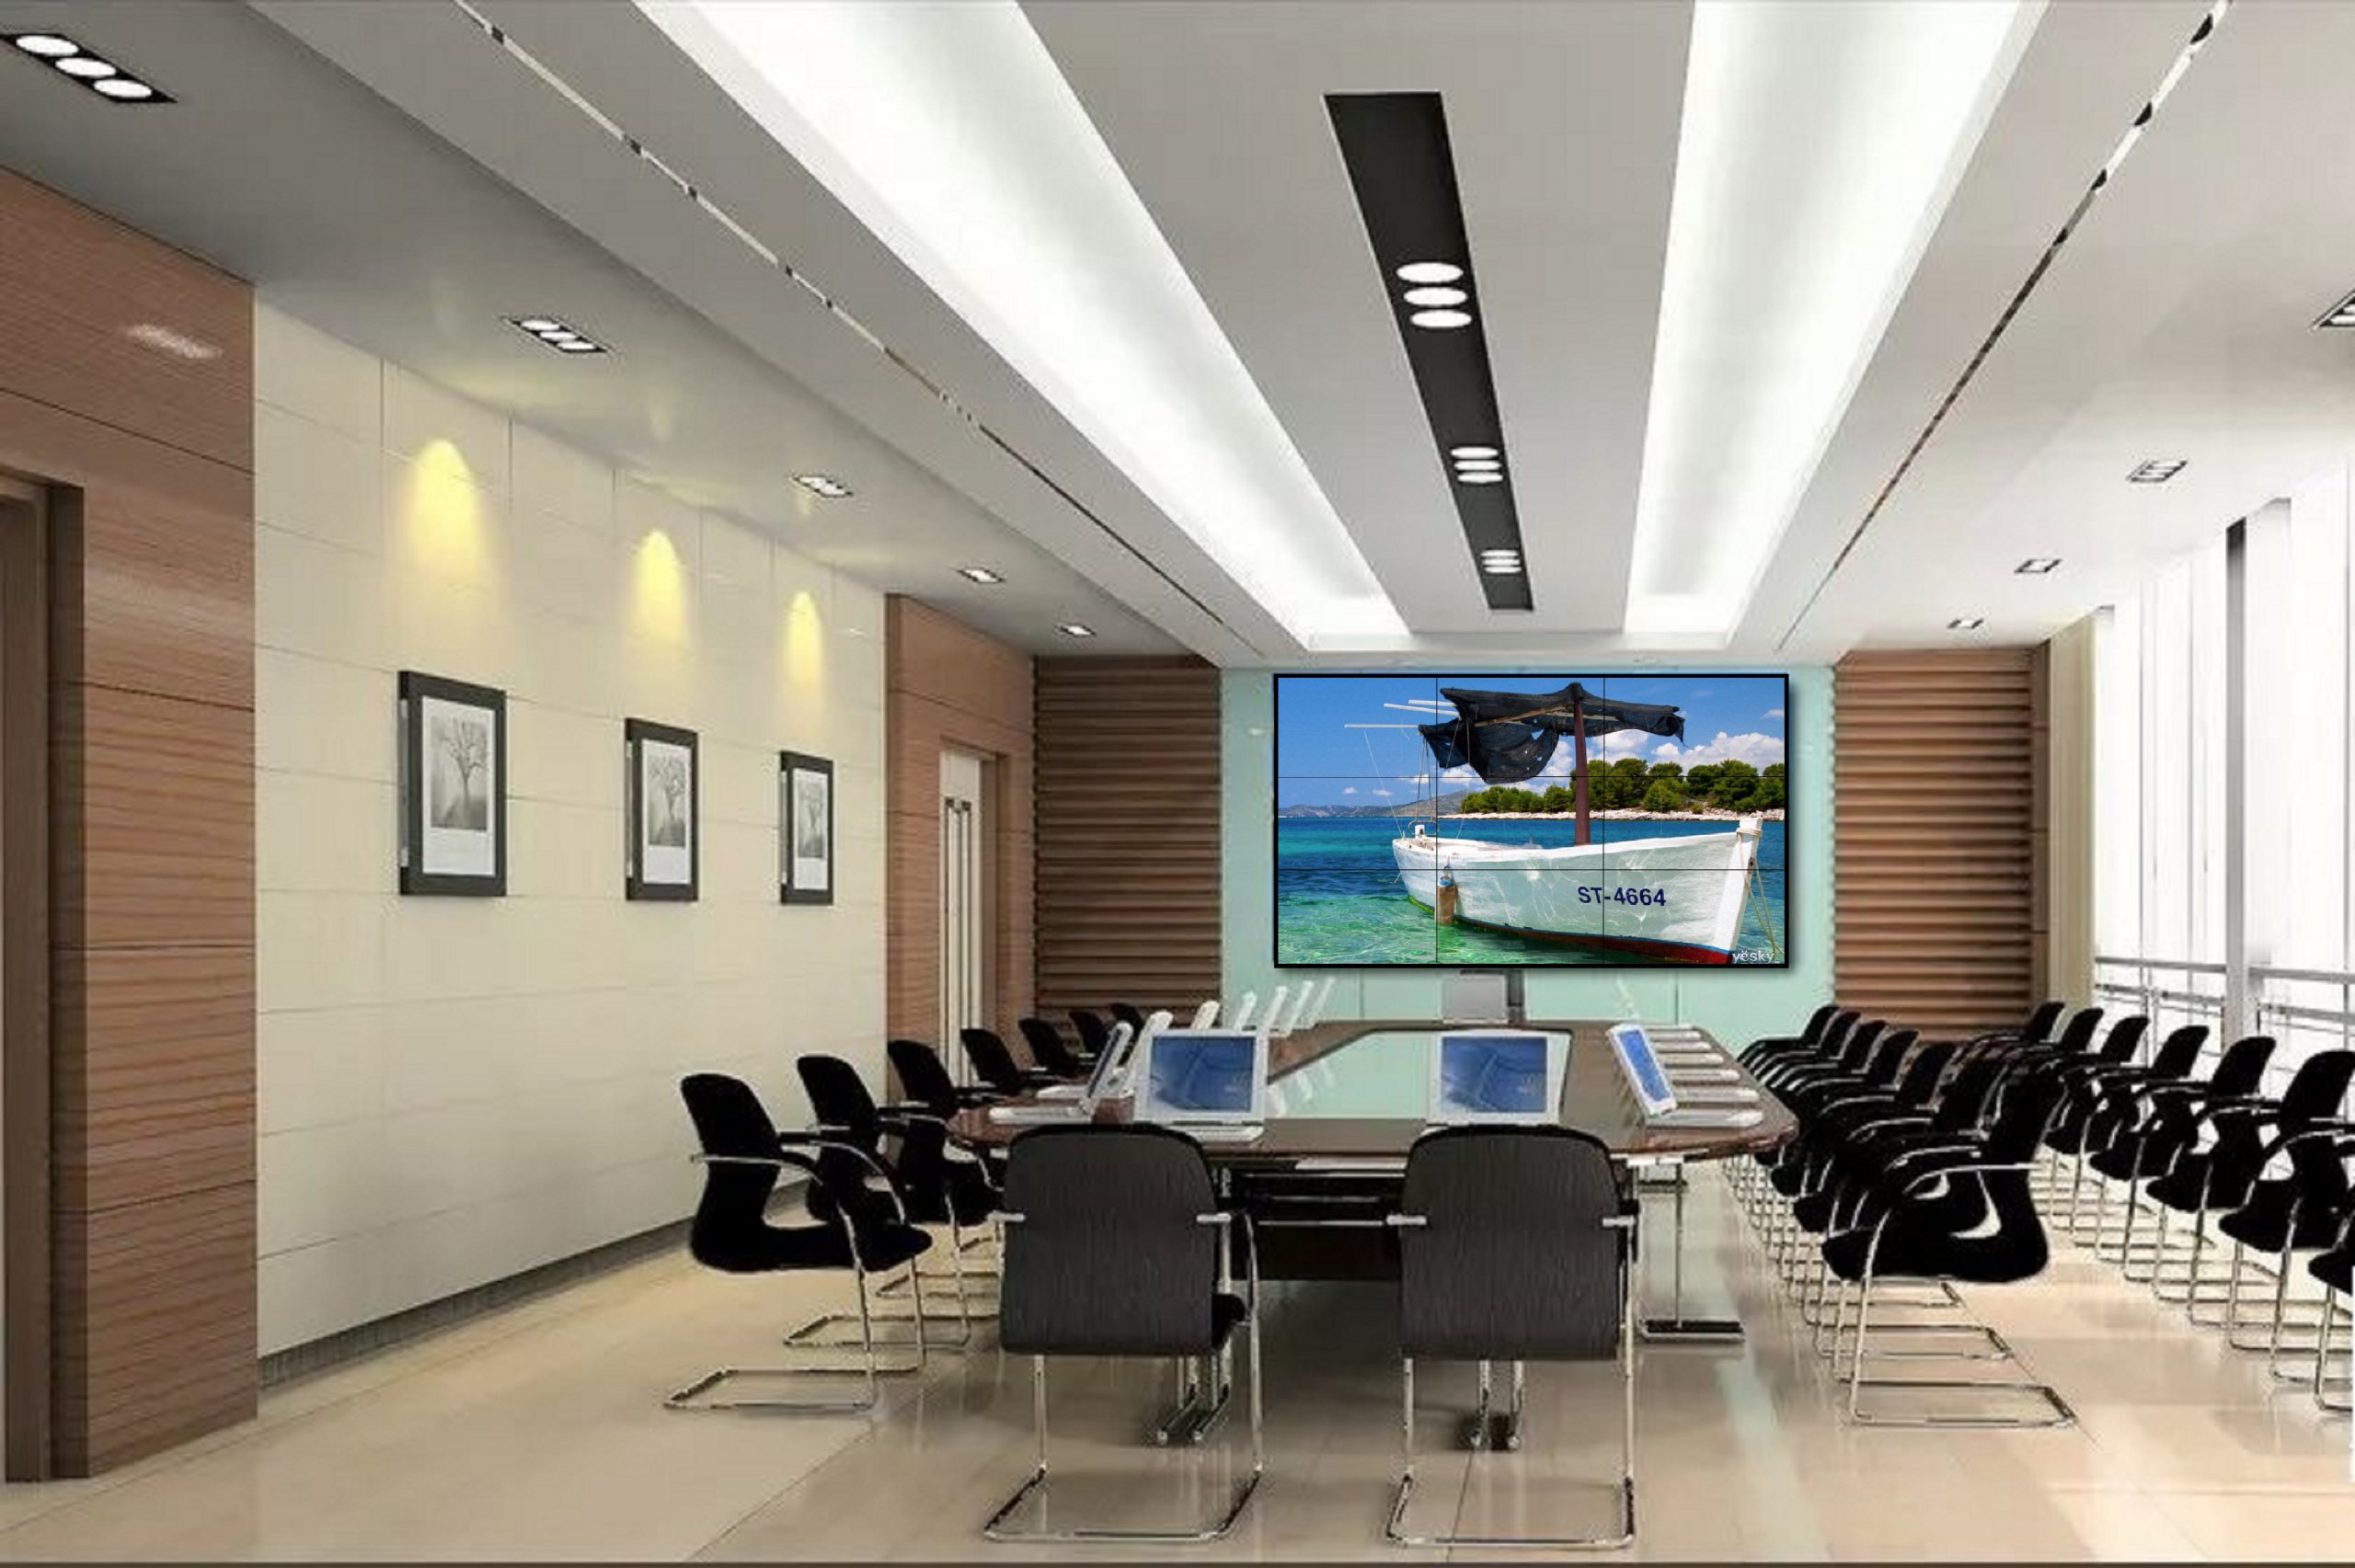 Question:How to choose a full color LED display screen in a large hotel?